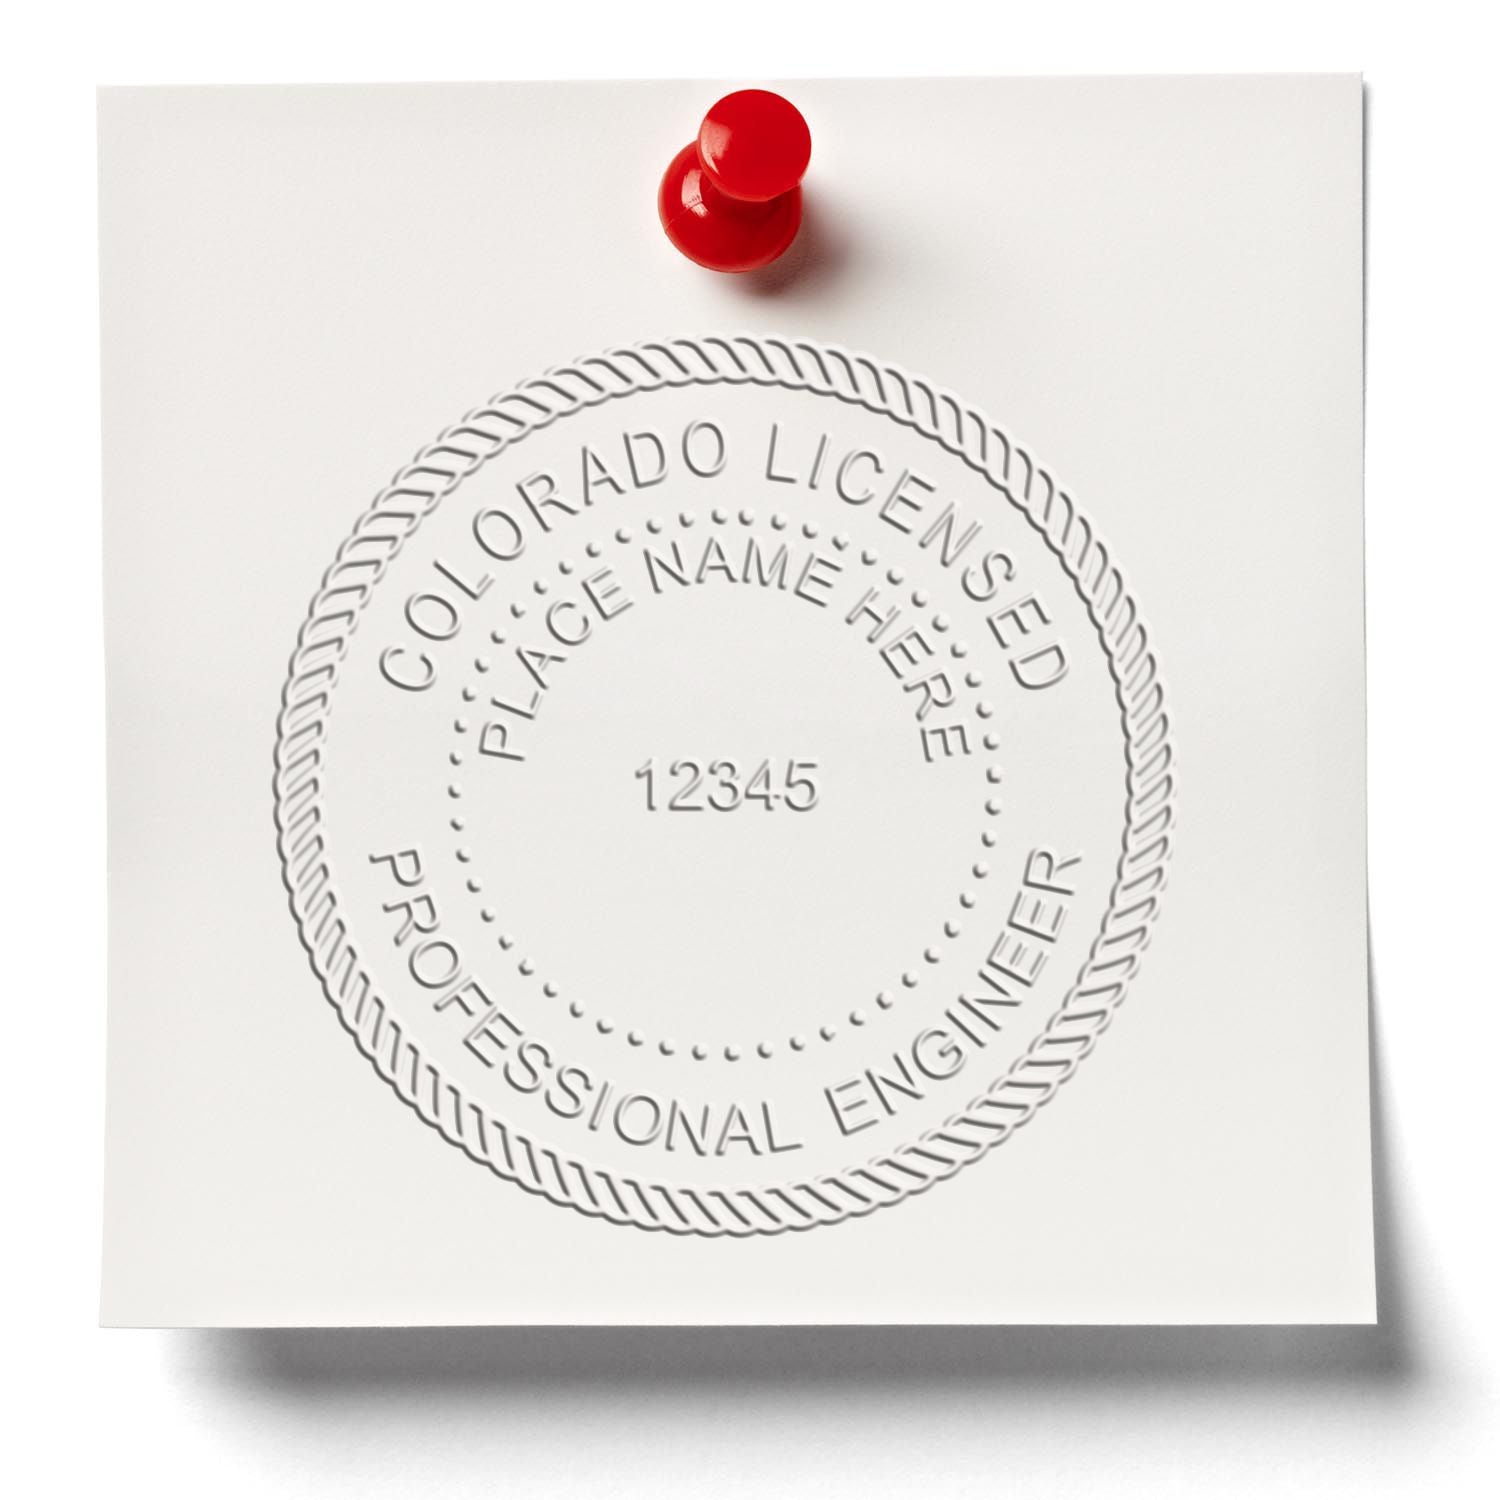 The State of Colorado Extended Long Reach Engineer Seal stamp impression comes to life with a crisp, detailed photo on paper - showcasing true professional quality.